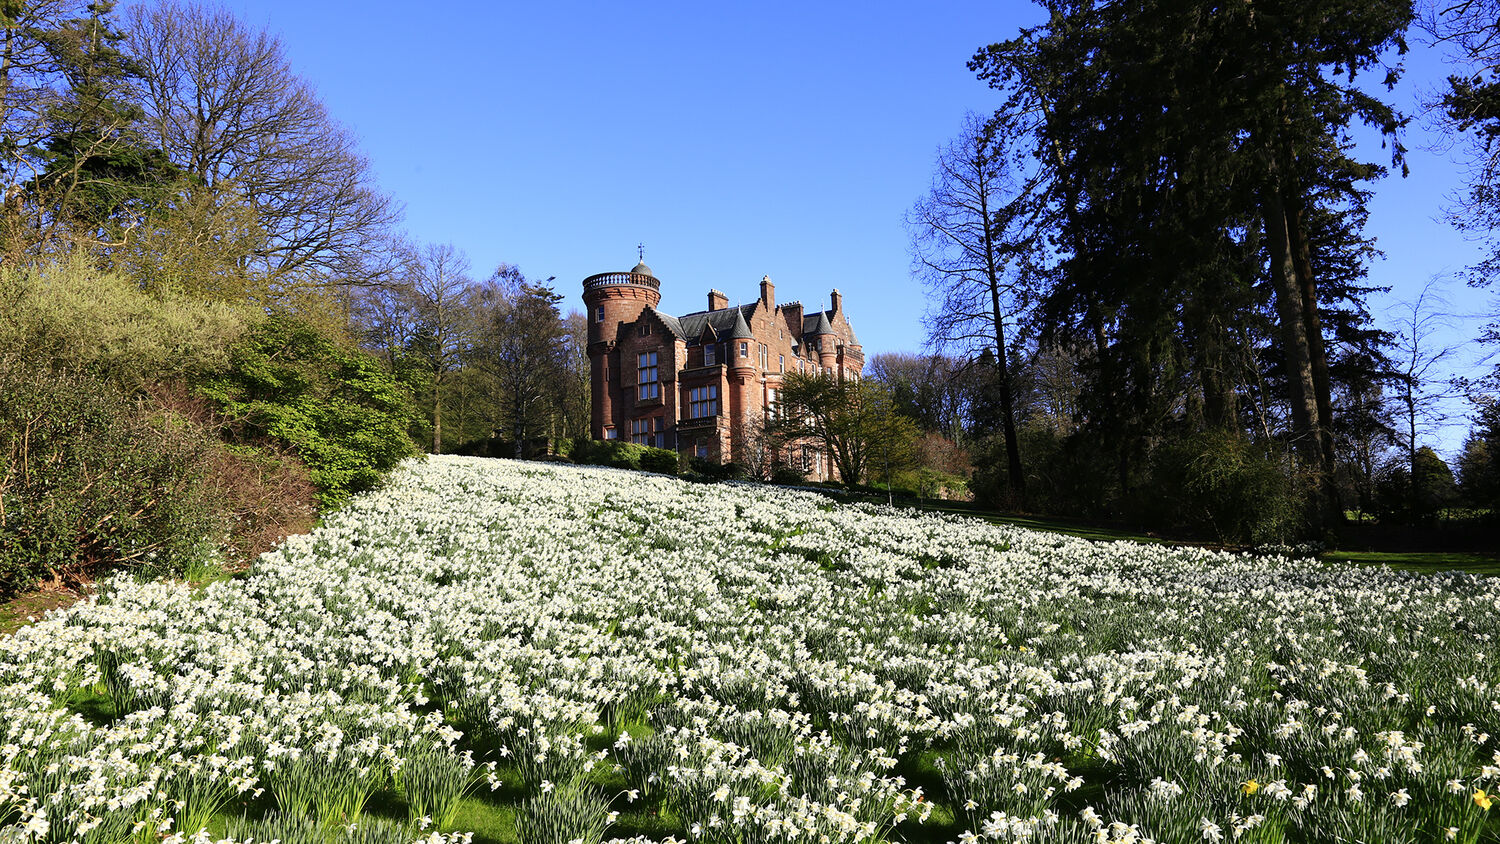 A view of Threave House from the bottom of a gently sloping hill. The foreground is carpeted with daffodils. Tall trees frame the photo.